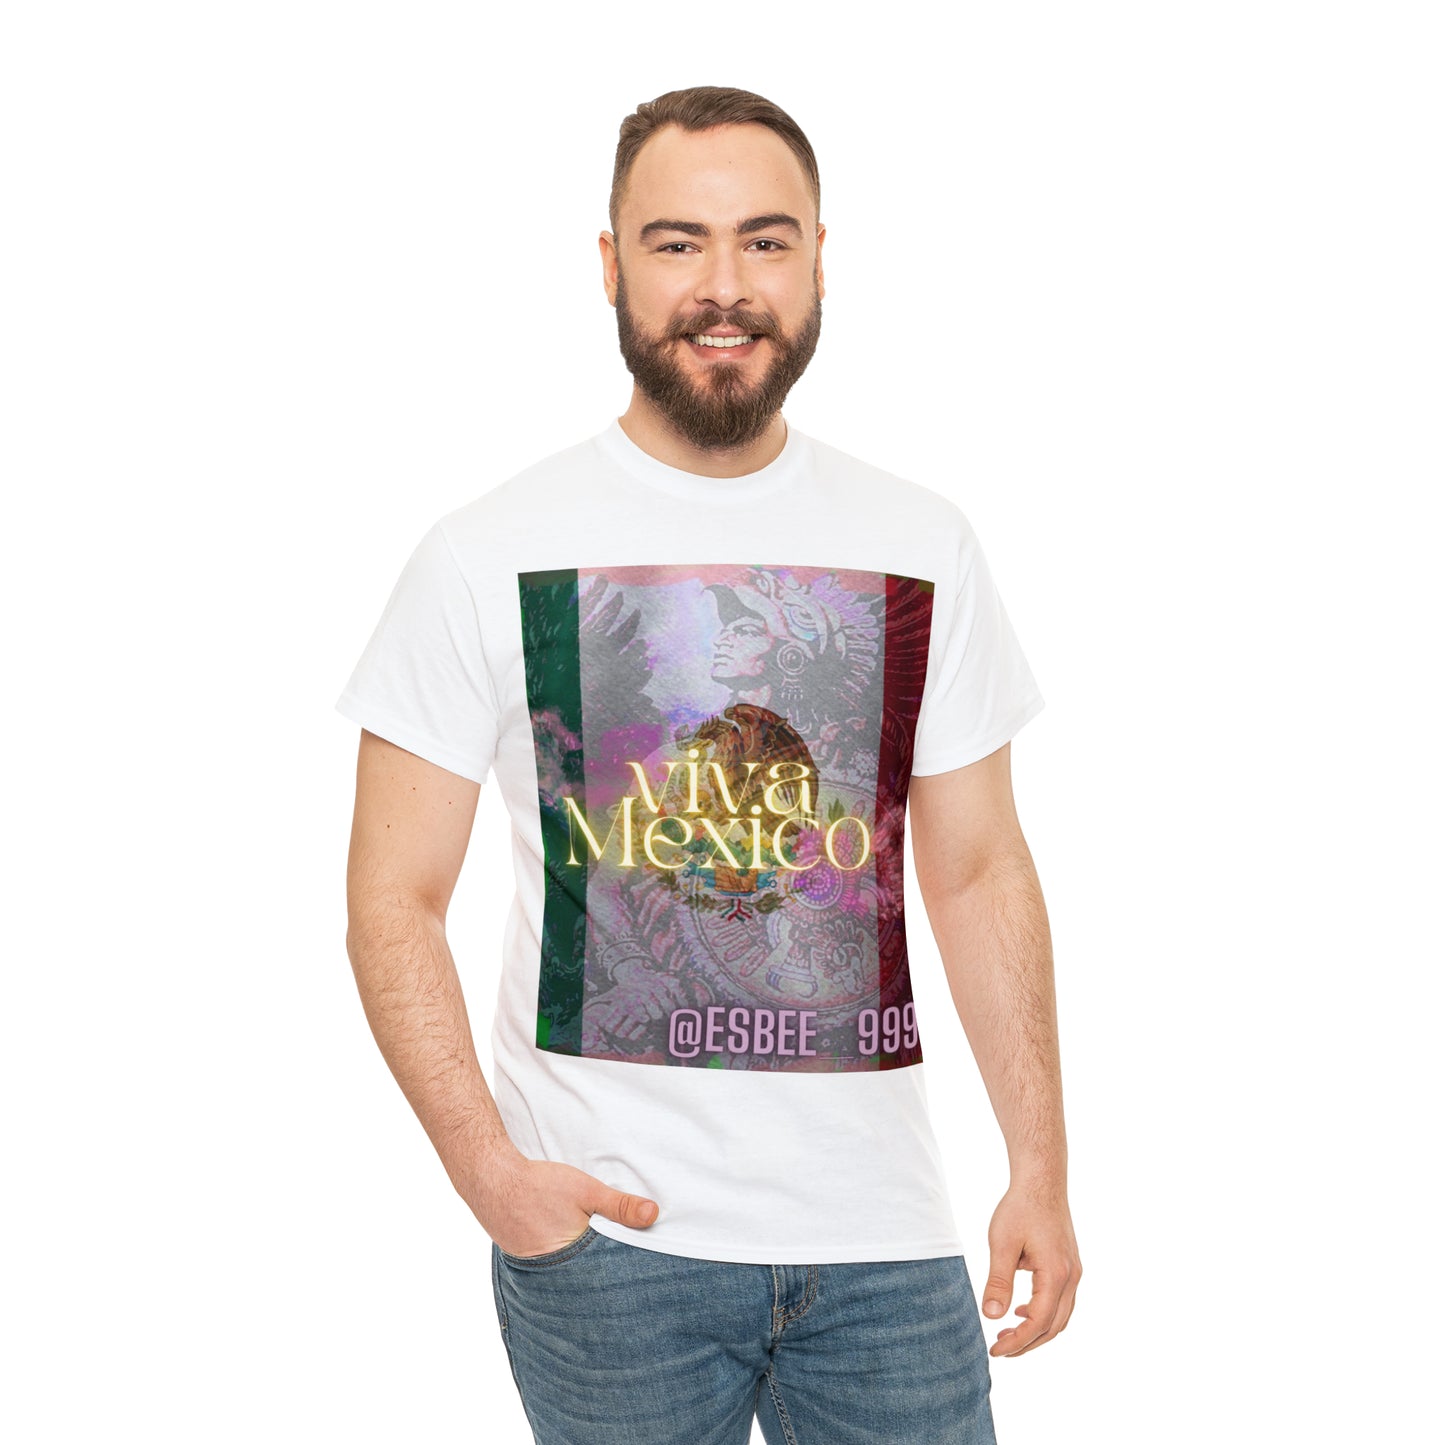 Viva Mexico Mexican Shirt Clothing for Women and Men Heavy Cotton Tee